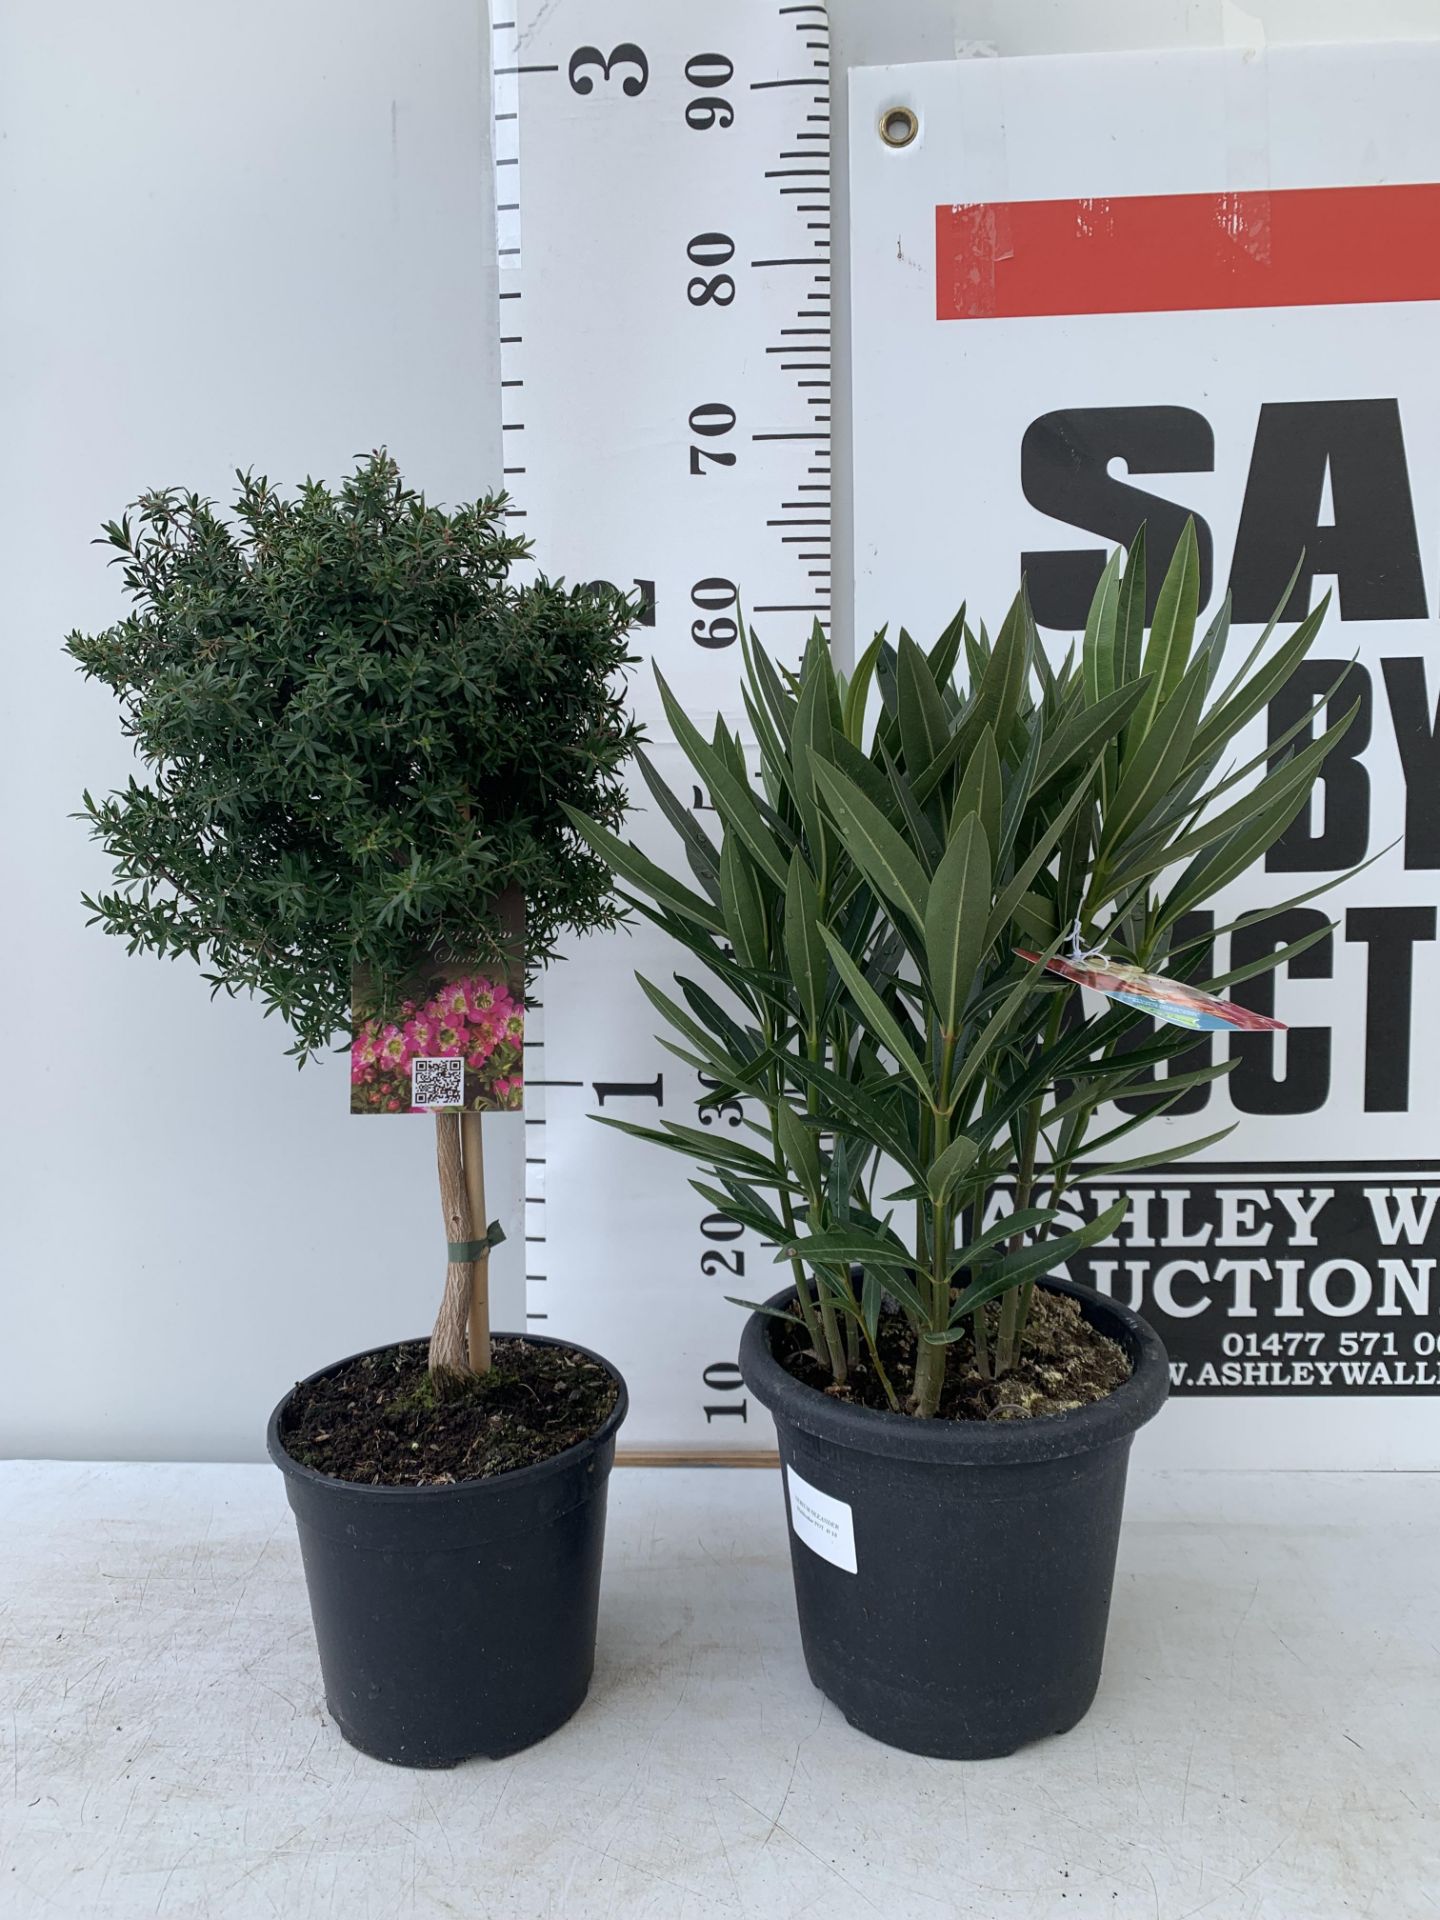 MIXED LOT OF TWO PLANTS - ONE OLEANDER NERIUM MULTICOLOURED IN 3 LTR POT APPROX 60CM TALL AND ONE